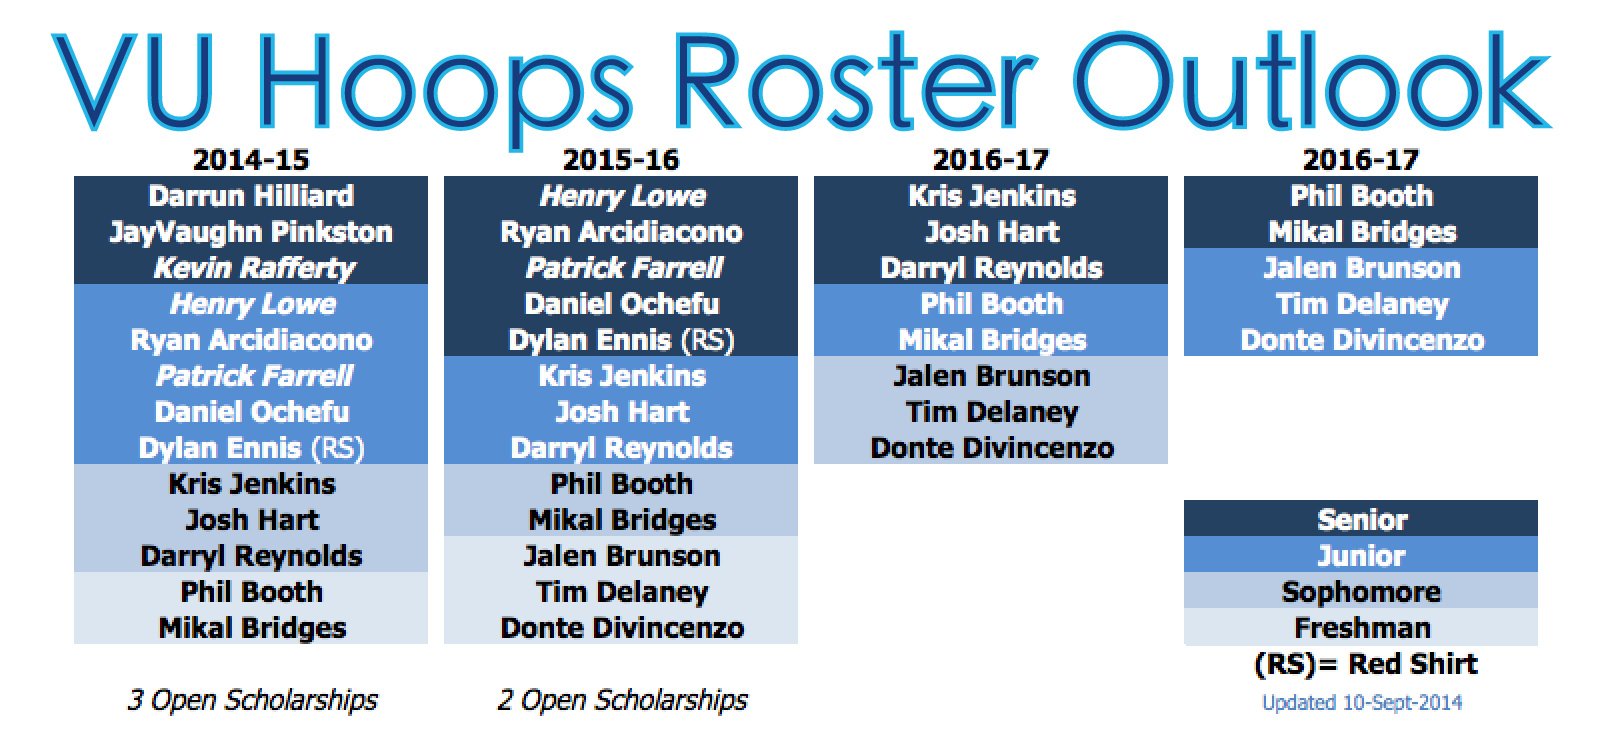 Roster_outlook